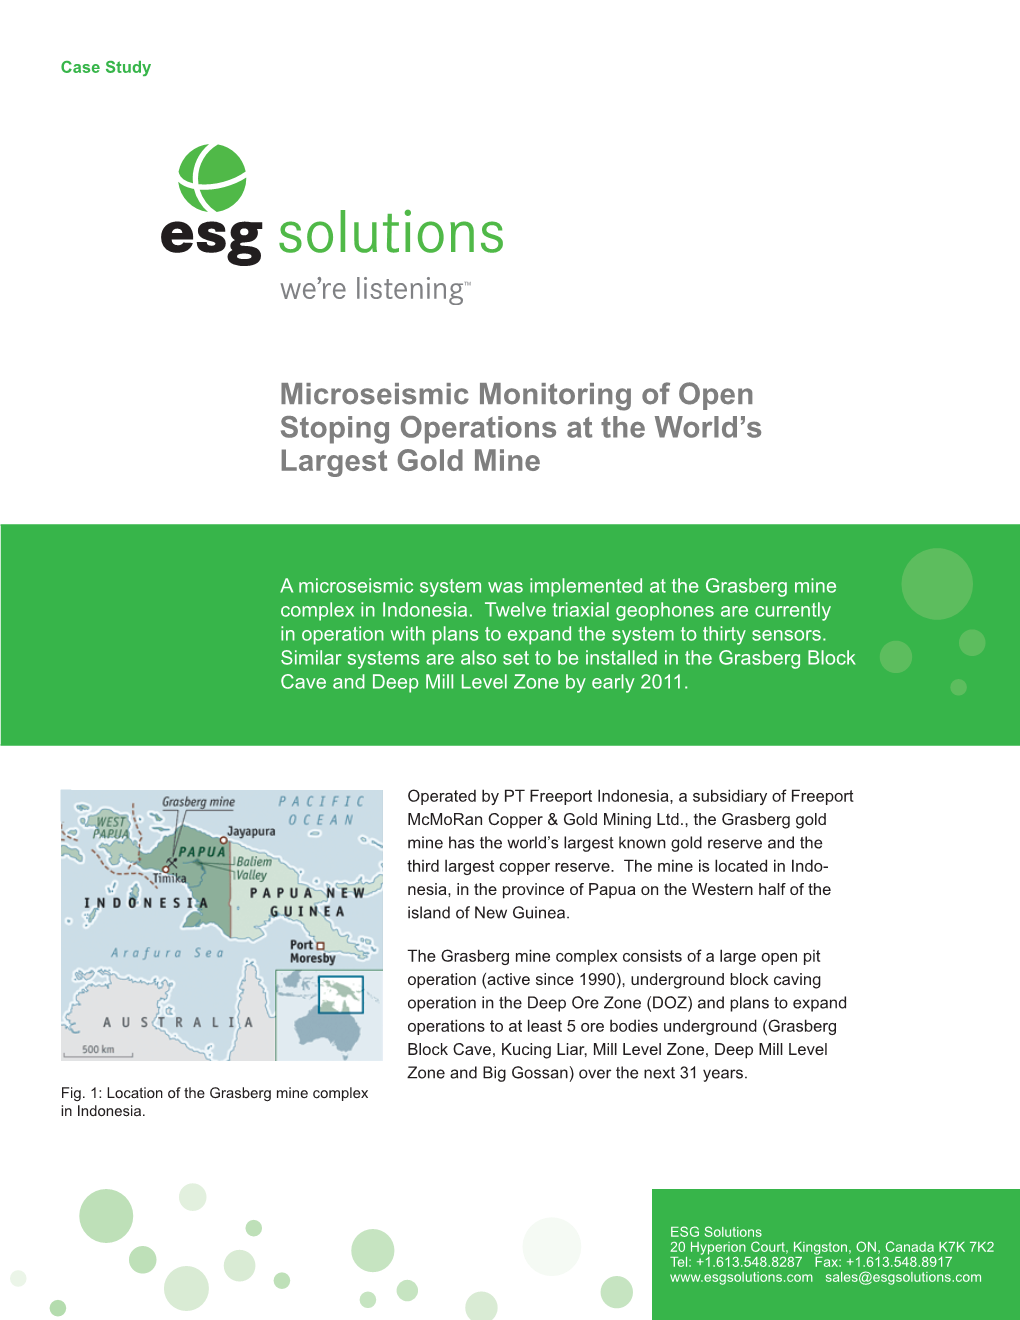 Microseismic Monitoring of Open Stoping Operations at the World's